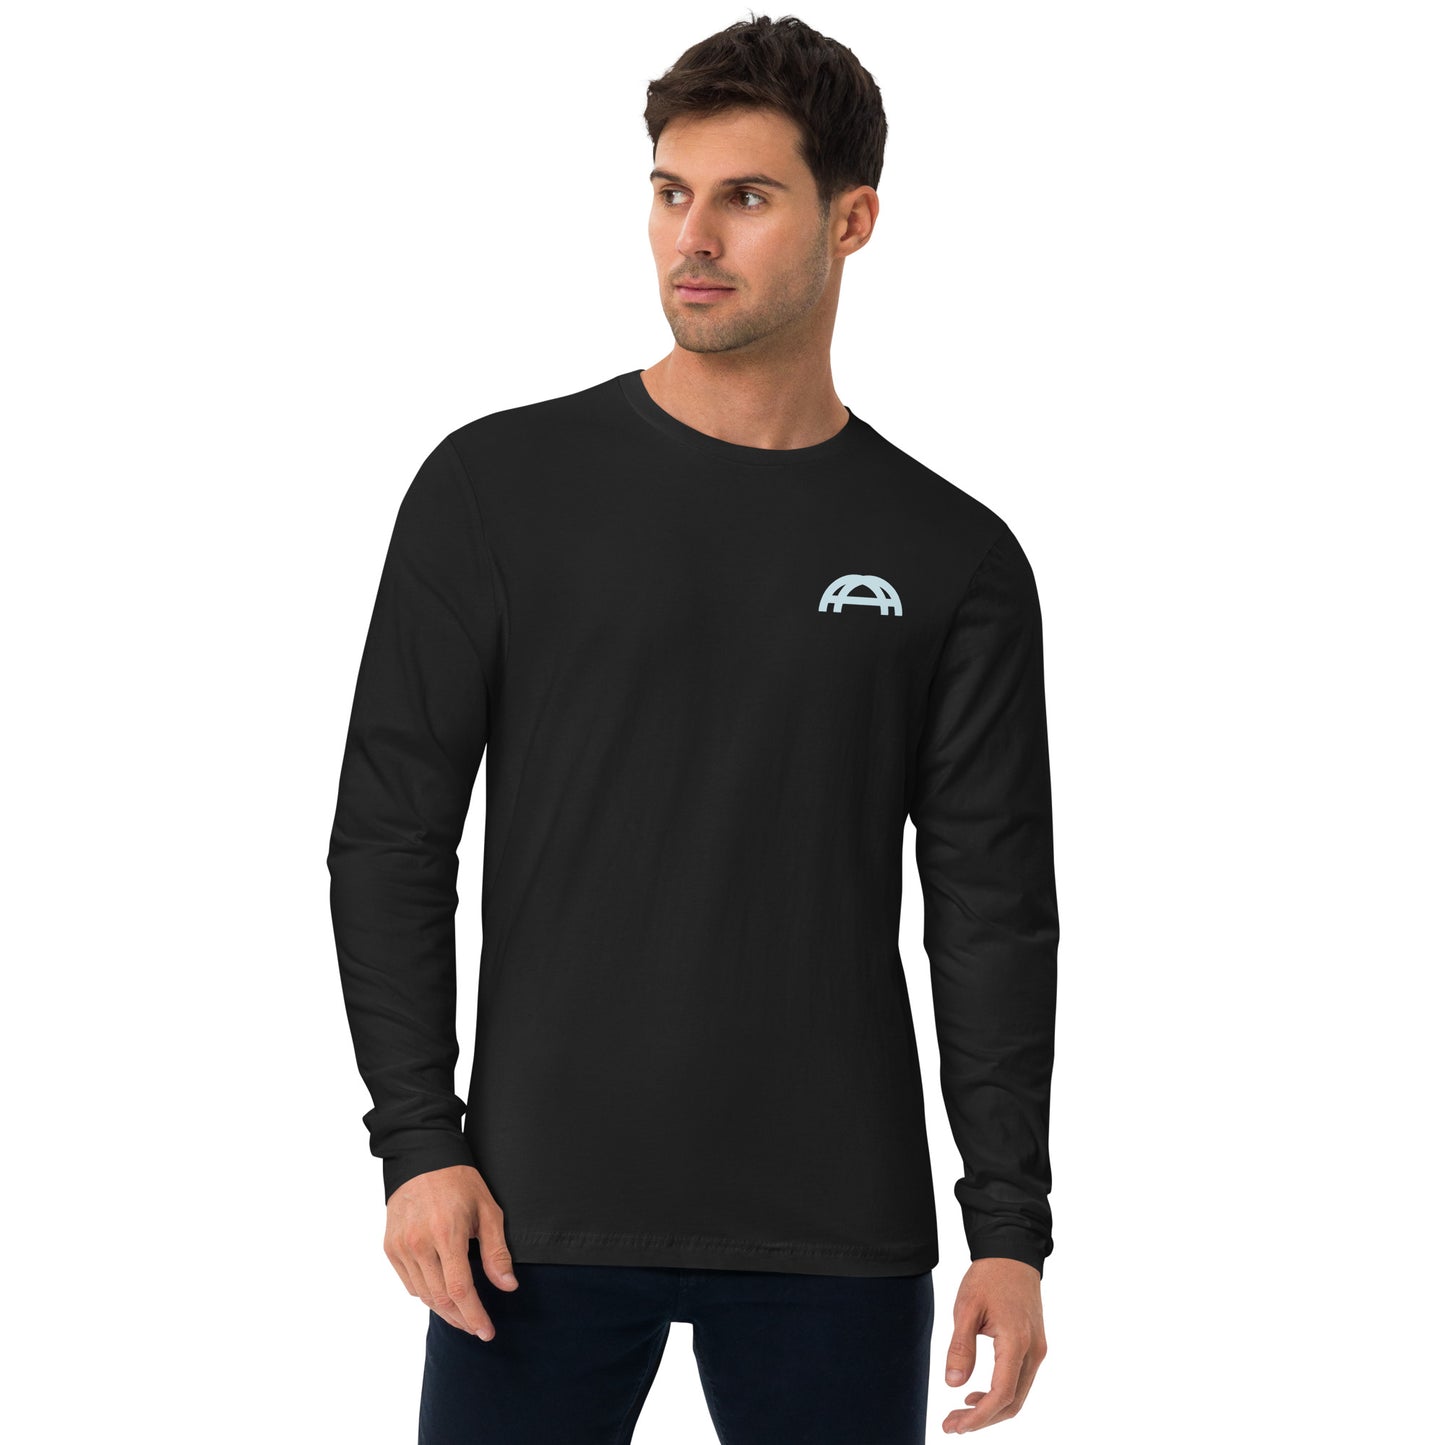 Lake Austin Design Long Sleeve Fitted Crew